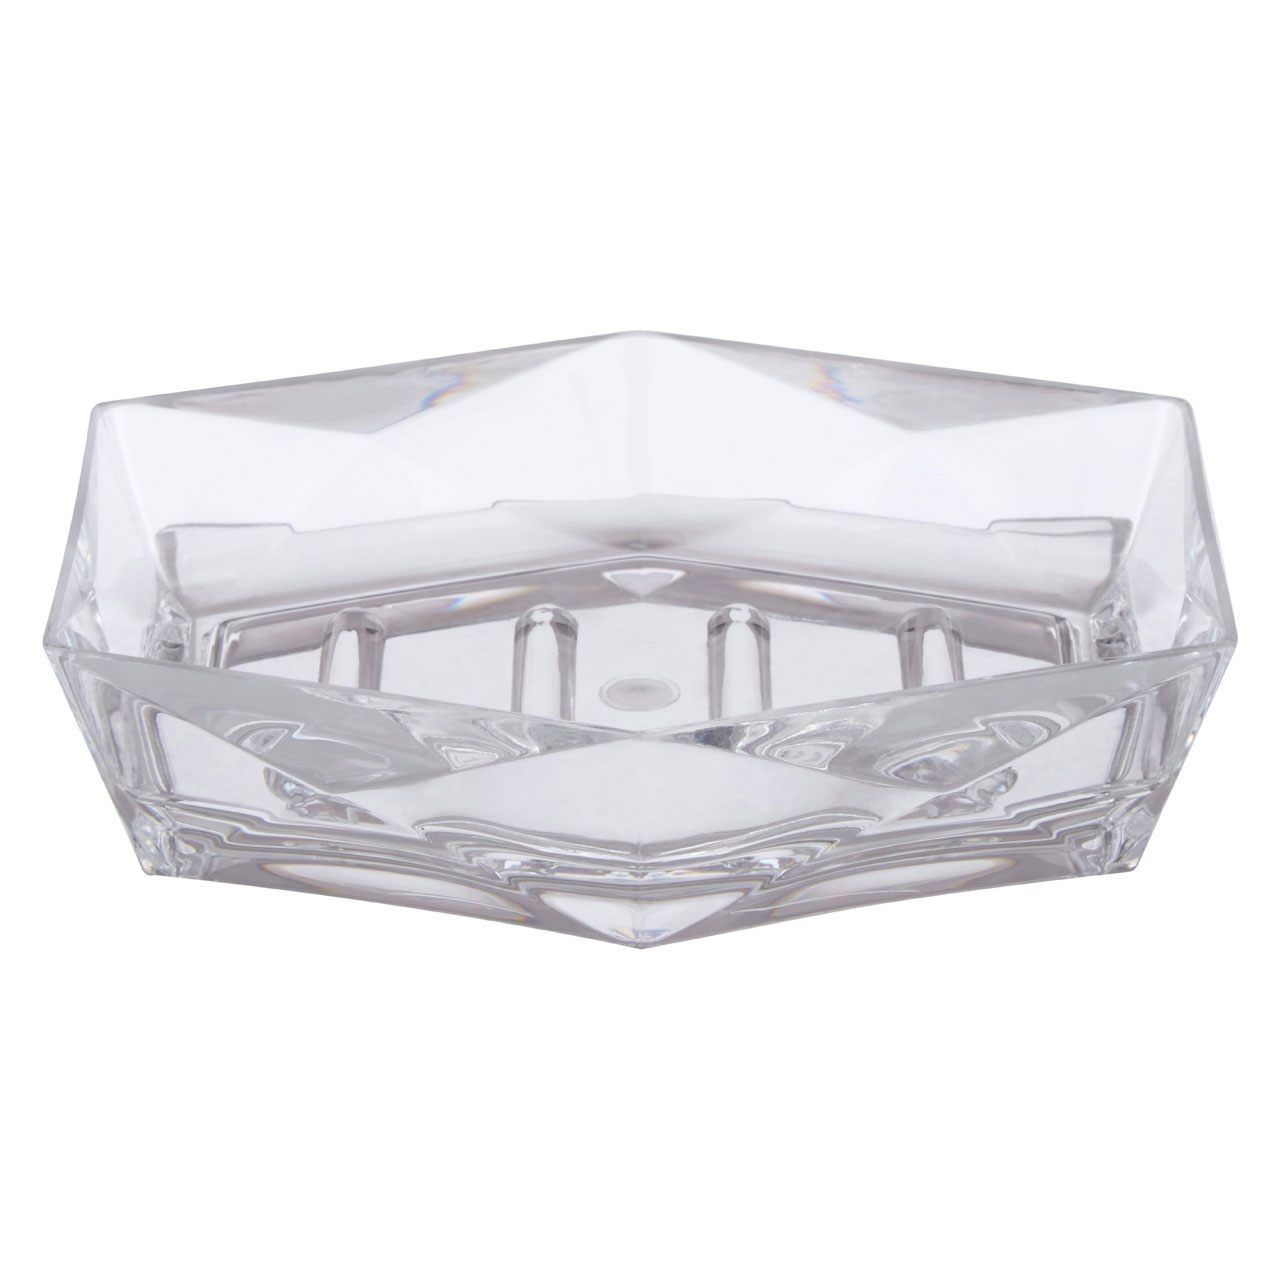 Accents Dow clear acrylic soap dish